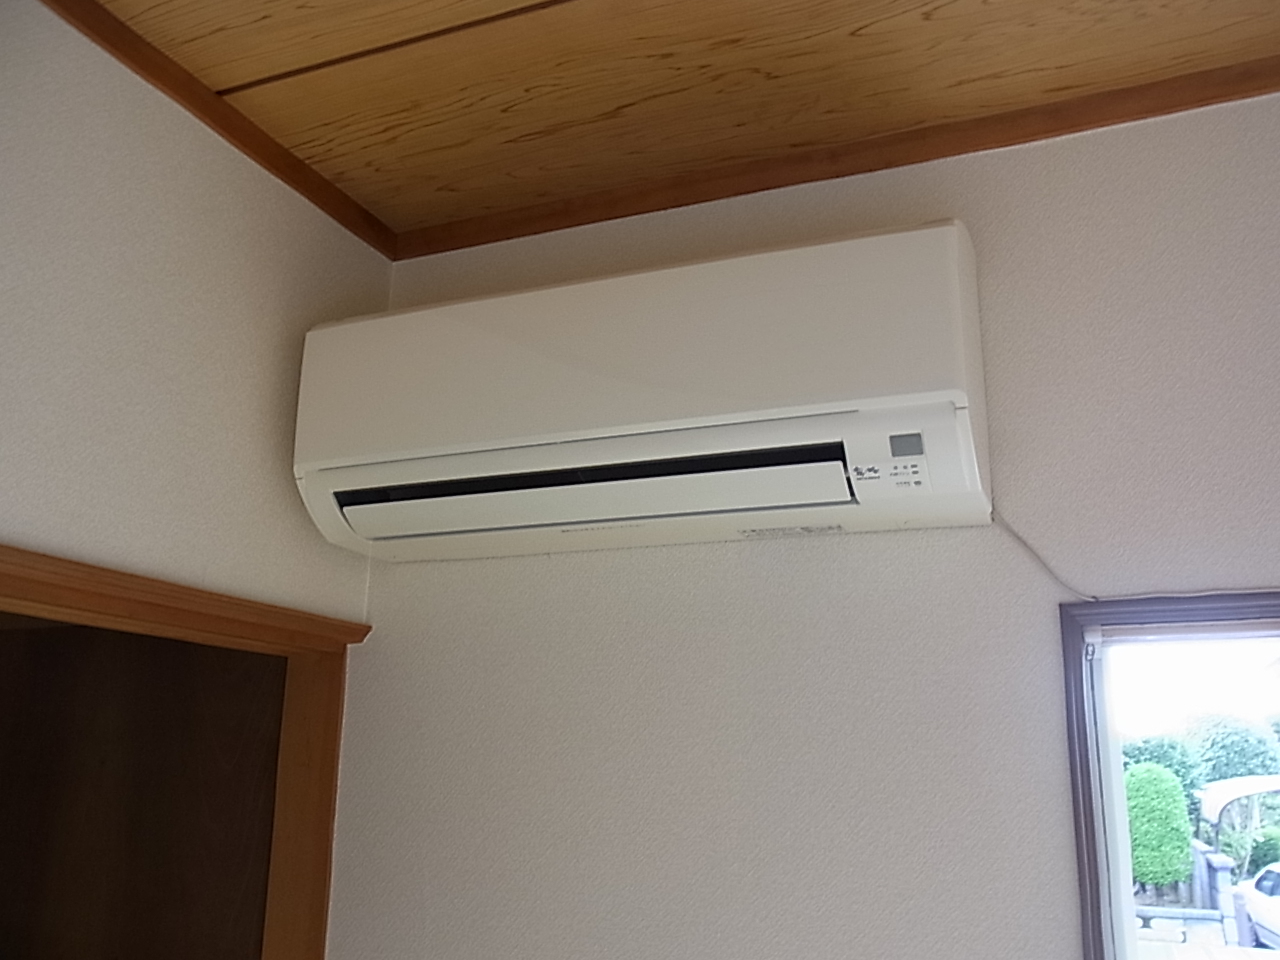 Other Equipment. 1F Japanese-style room: air conditioning